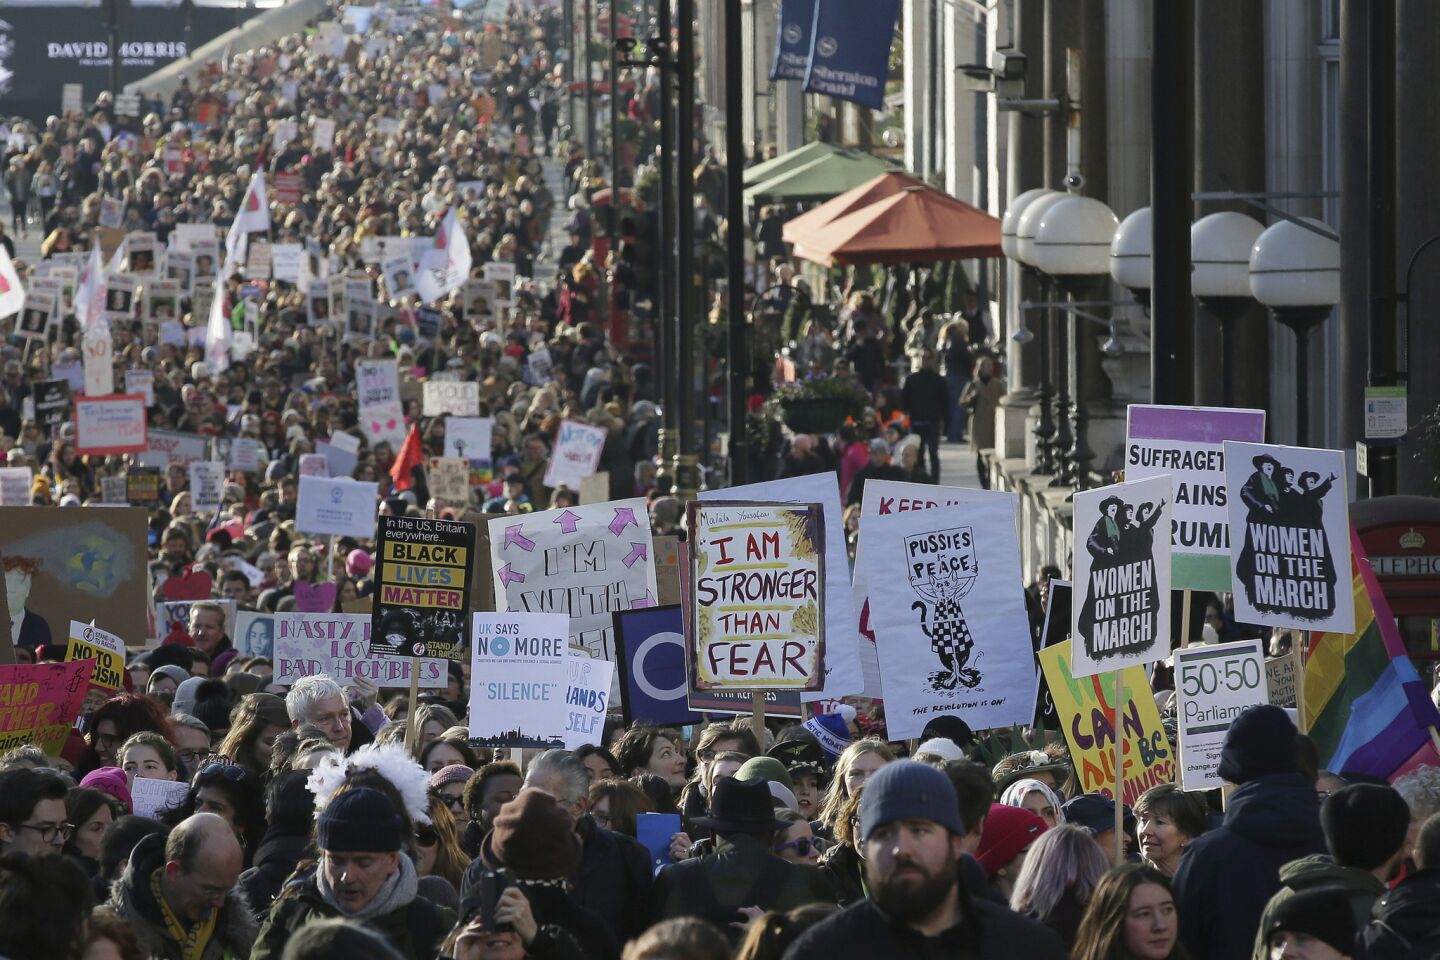 Marchers in London show their support for women's rights.